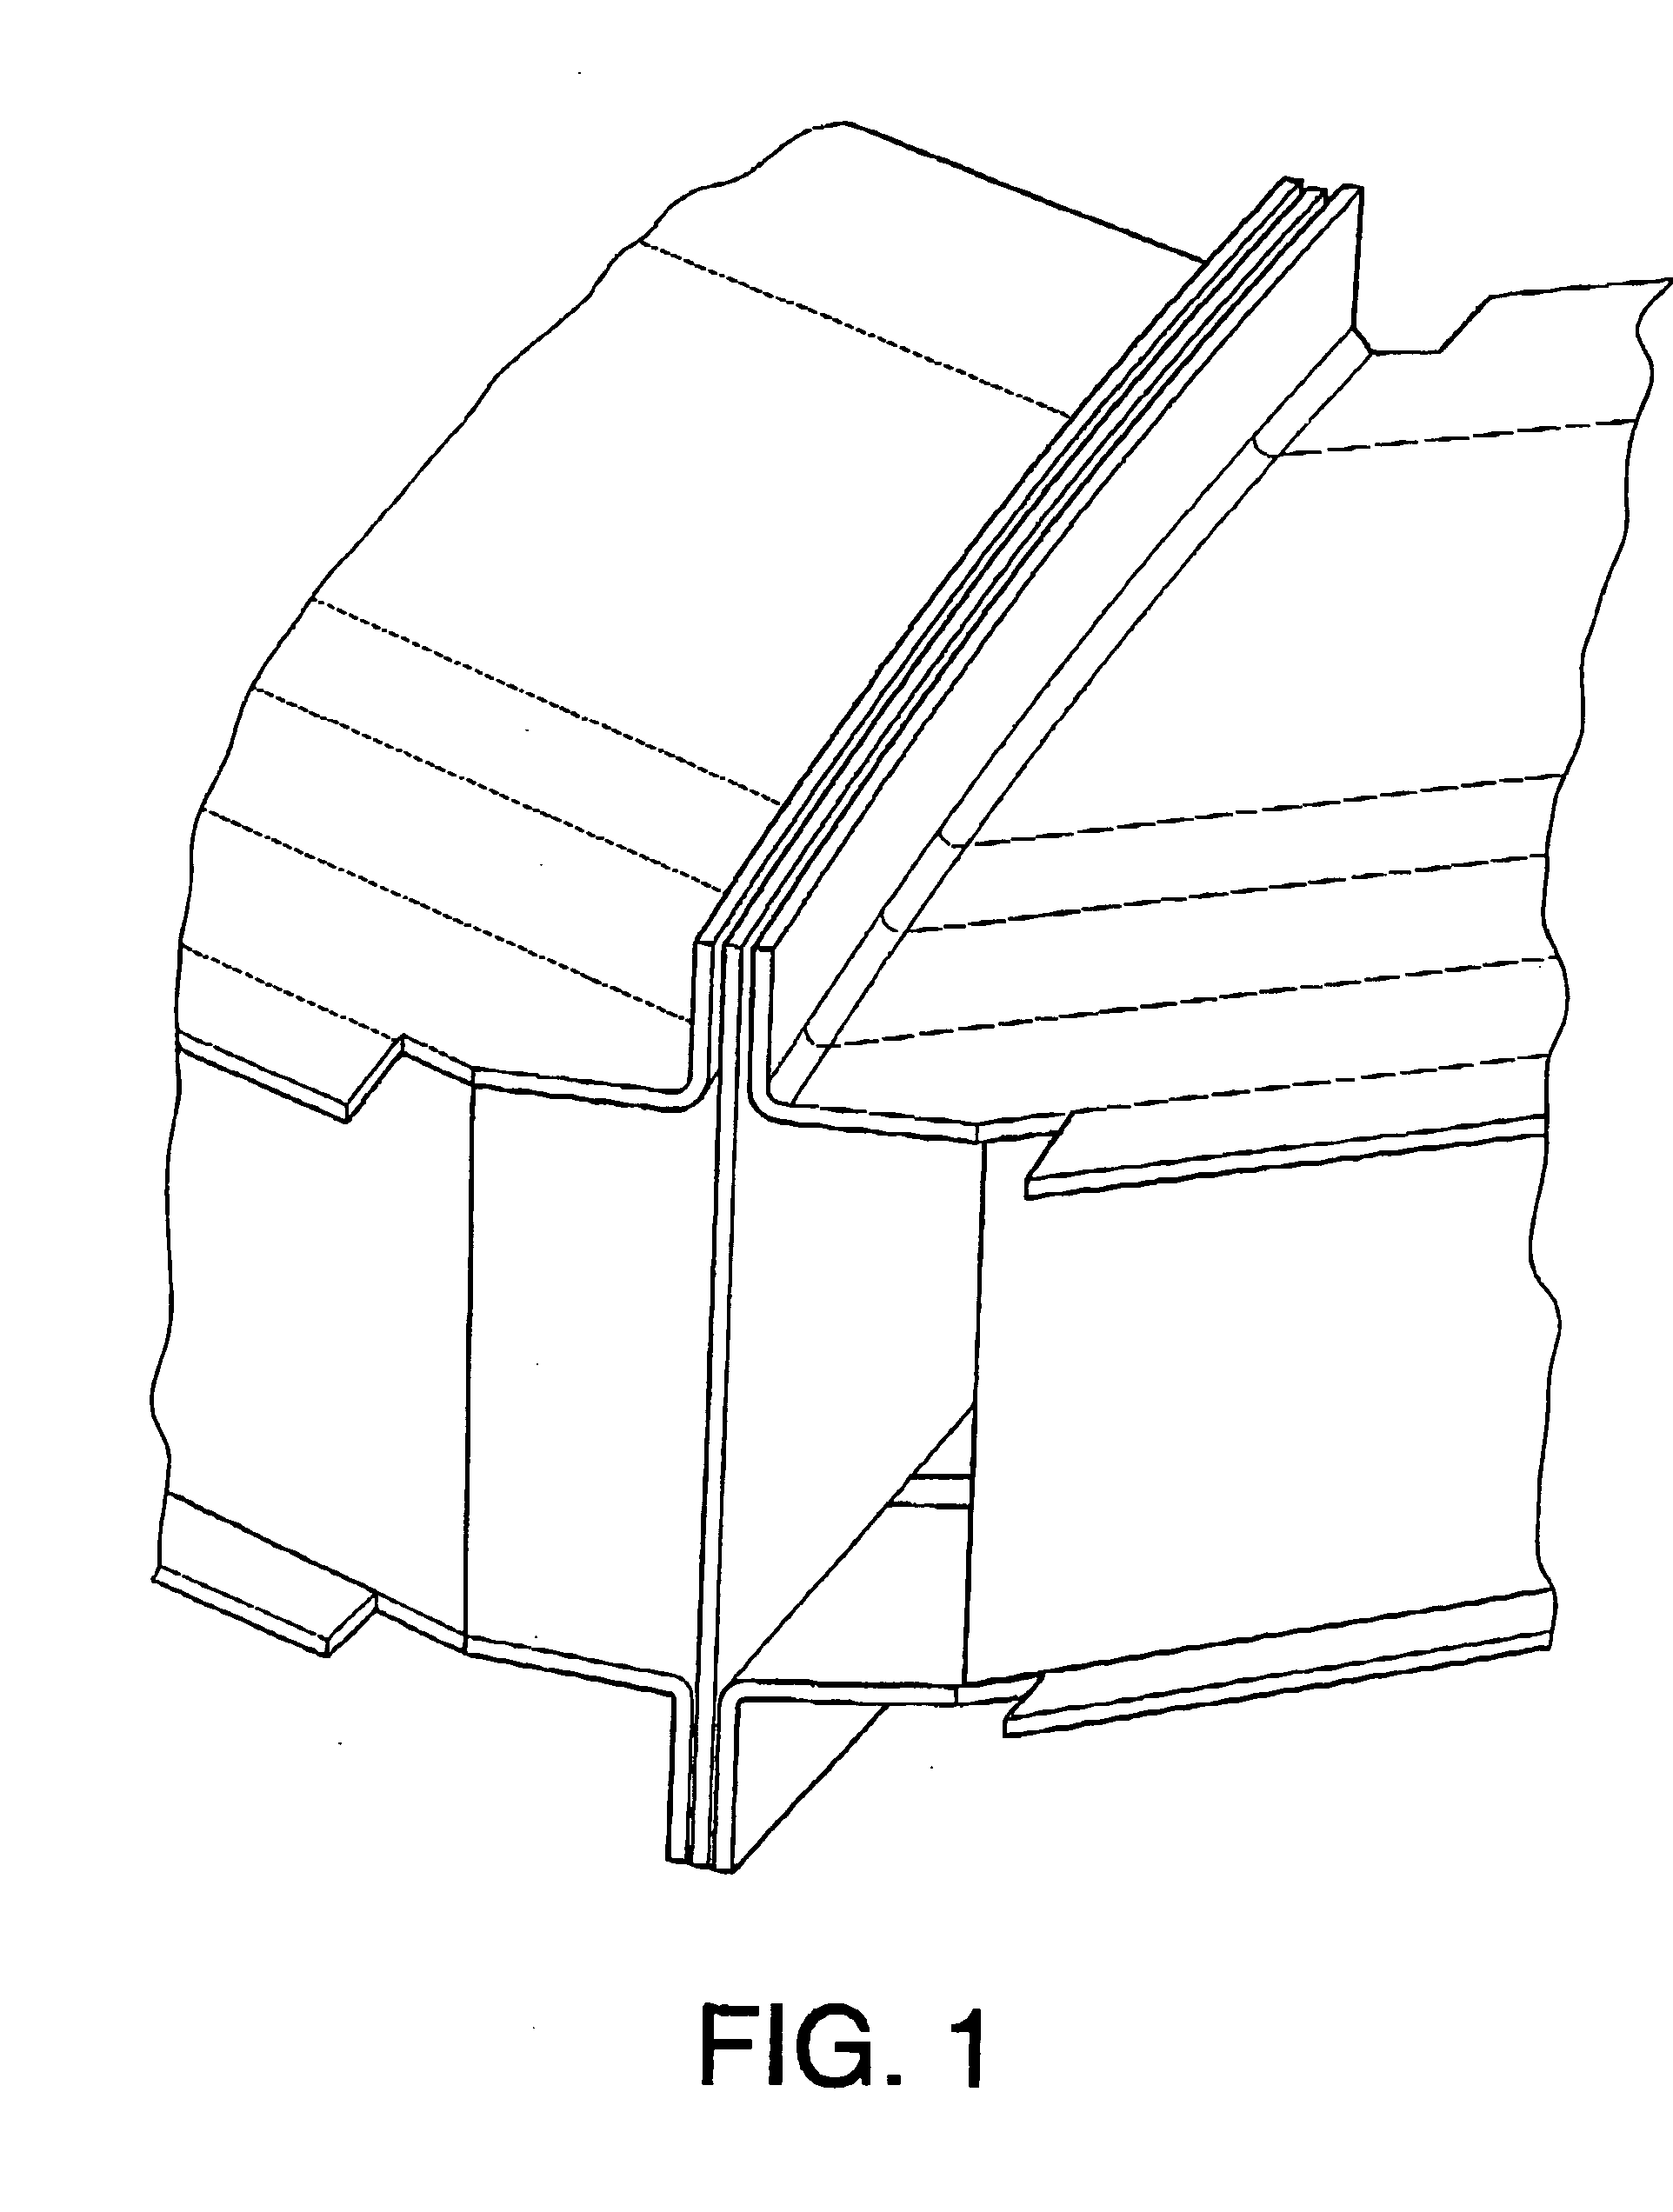 Assembly between a front fitting and the traction coupling of the two lateral boxes of the horizontal stabilizer of an aircraft